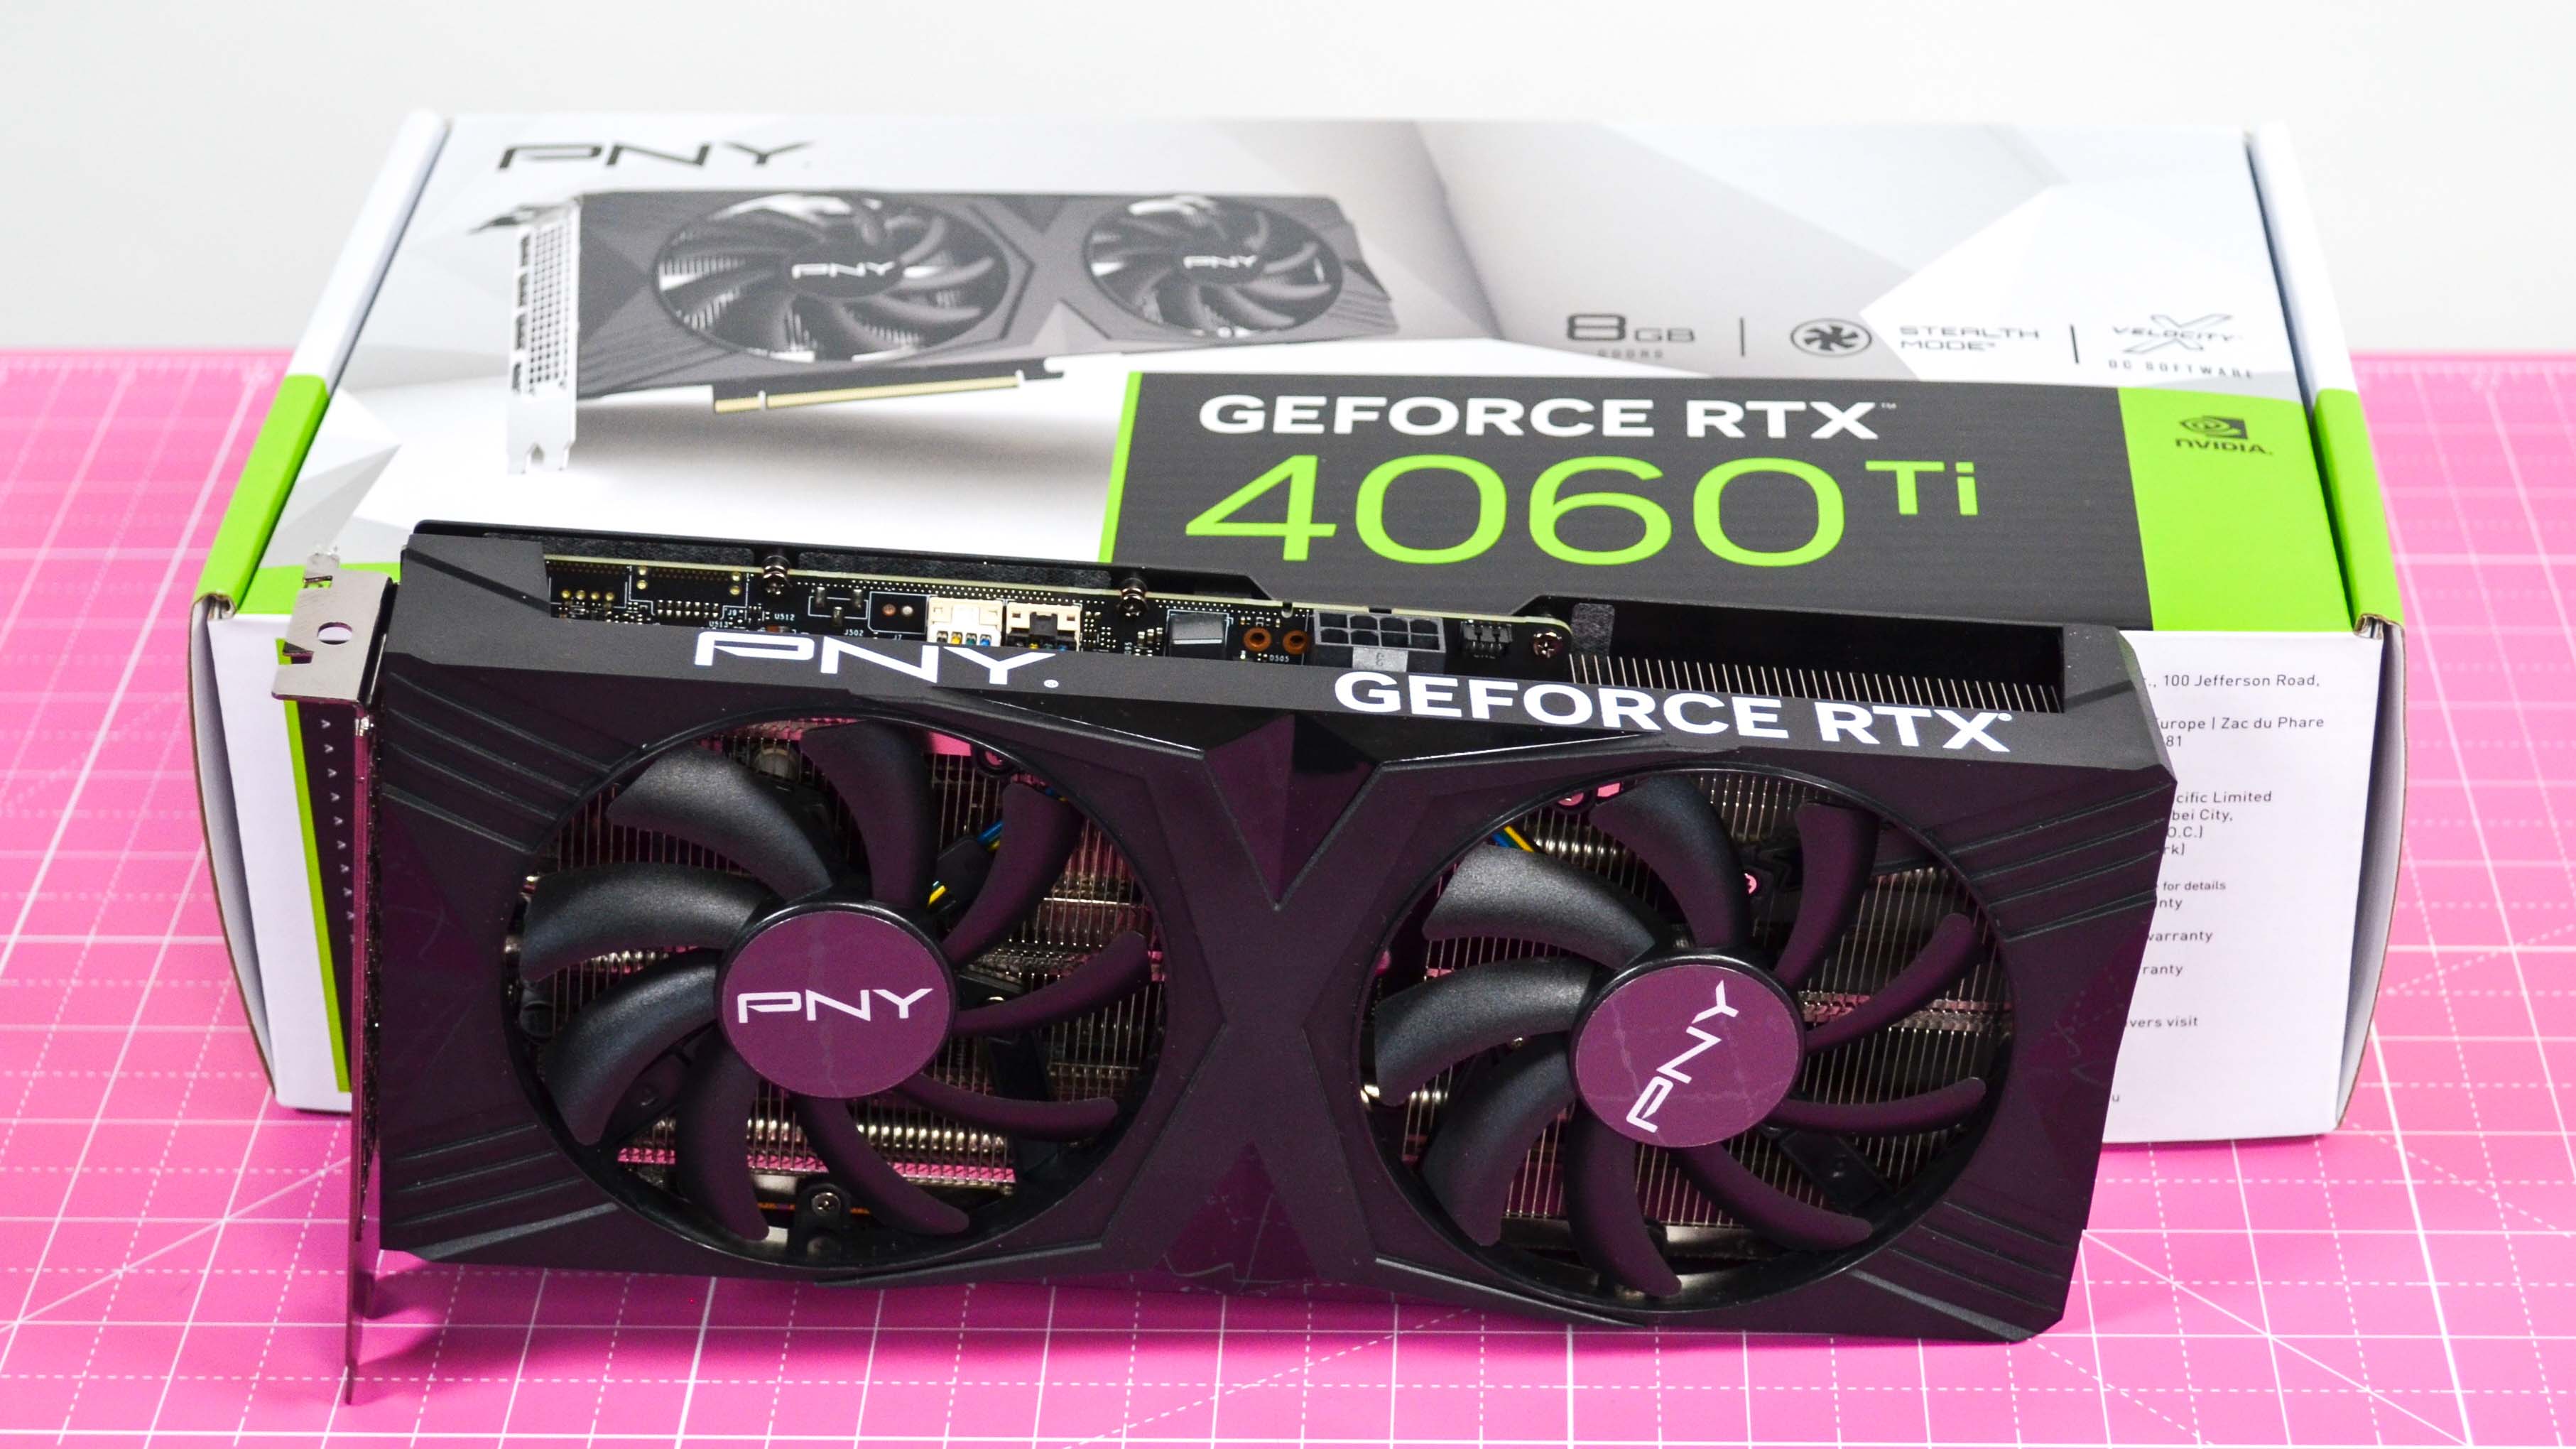 A PNY GeForce RTX 4060 Ti on a desk with a pink desk mat.